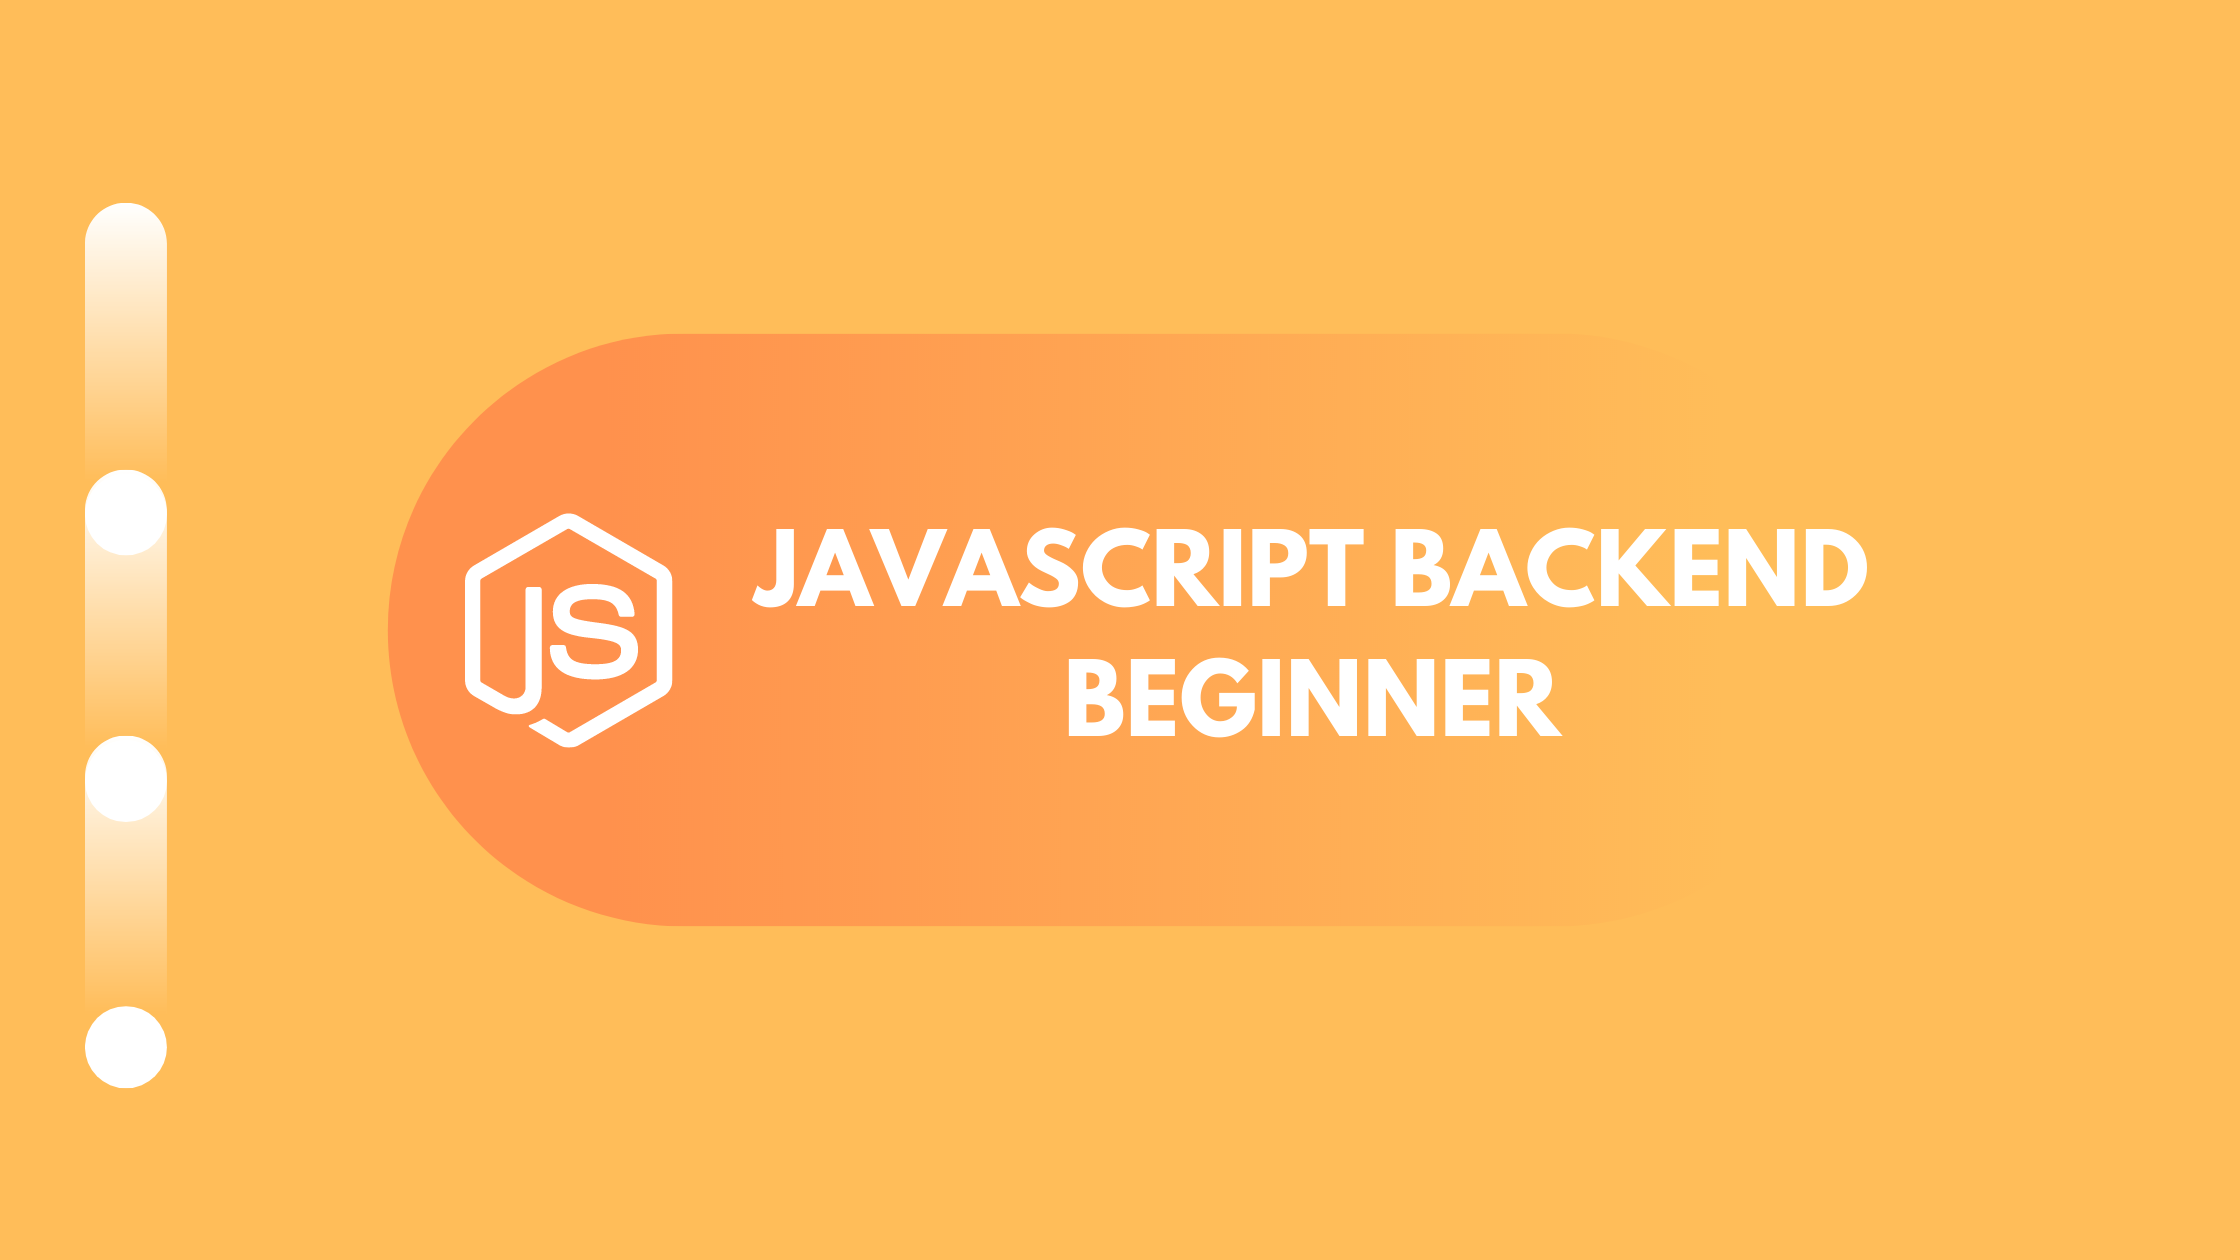 JavaScript Backend Development Course For Beginners